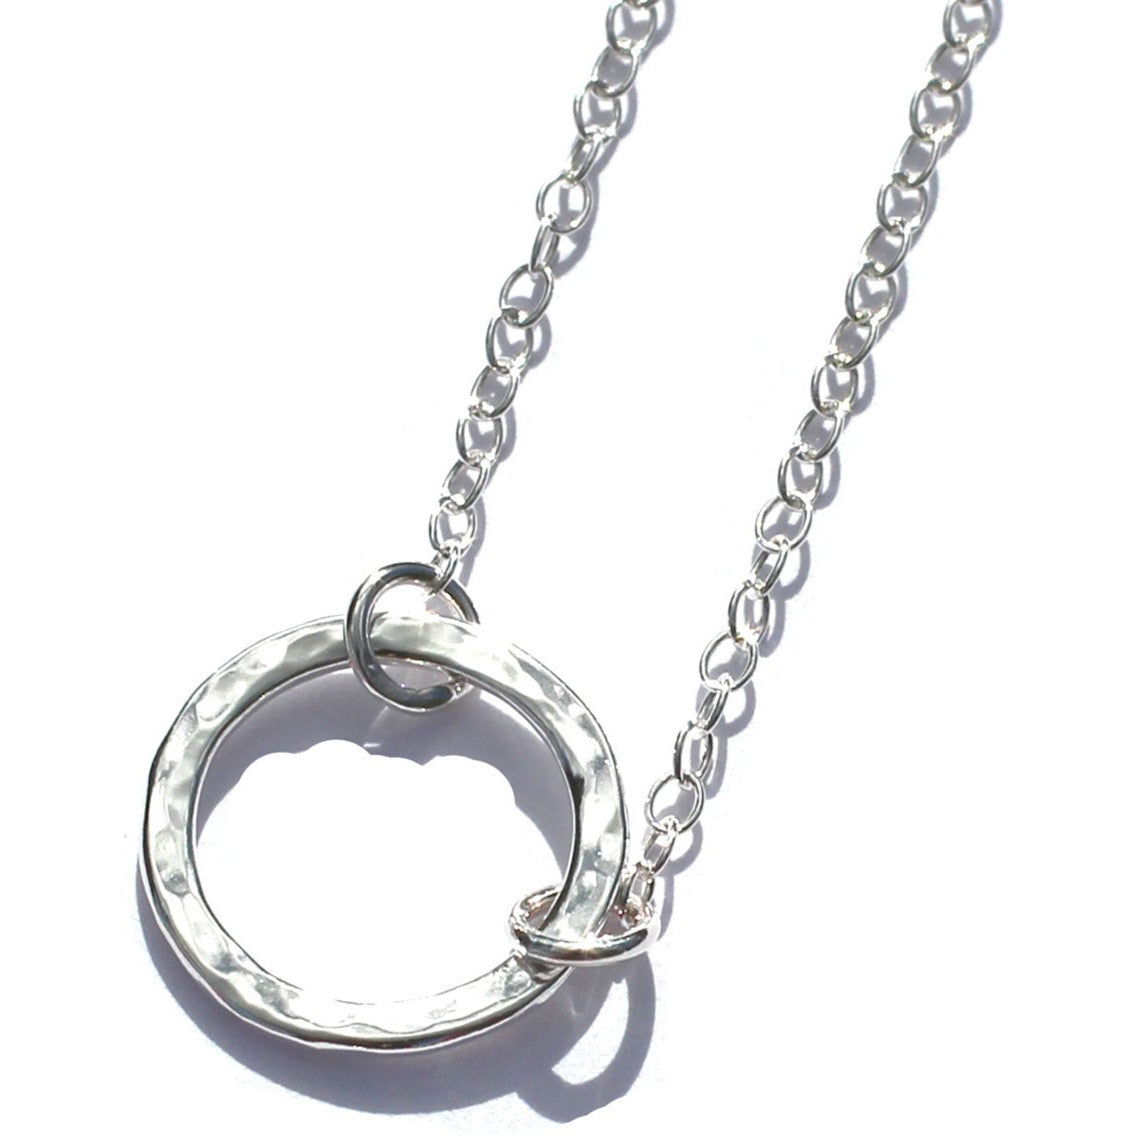 SUBMISSIVE DAY COLLAR,BDSM STERLING SILVER,DISCREET DAY COLLAR, HAMMERED O RING.